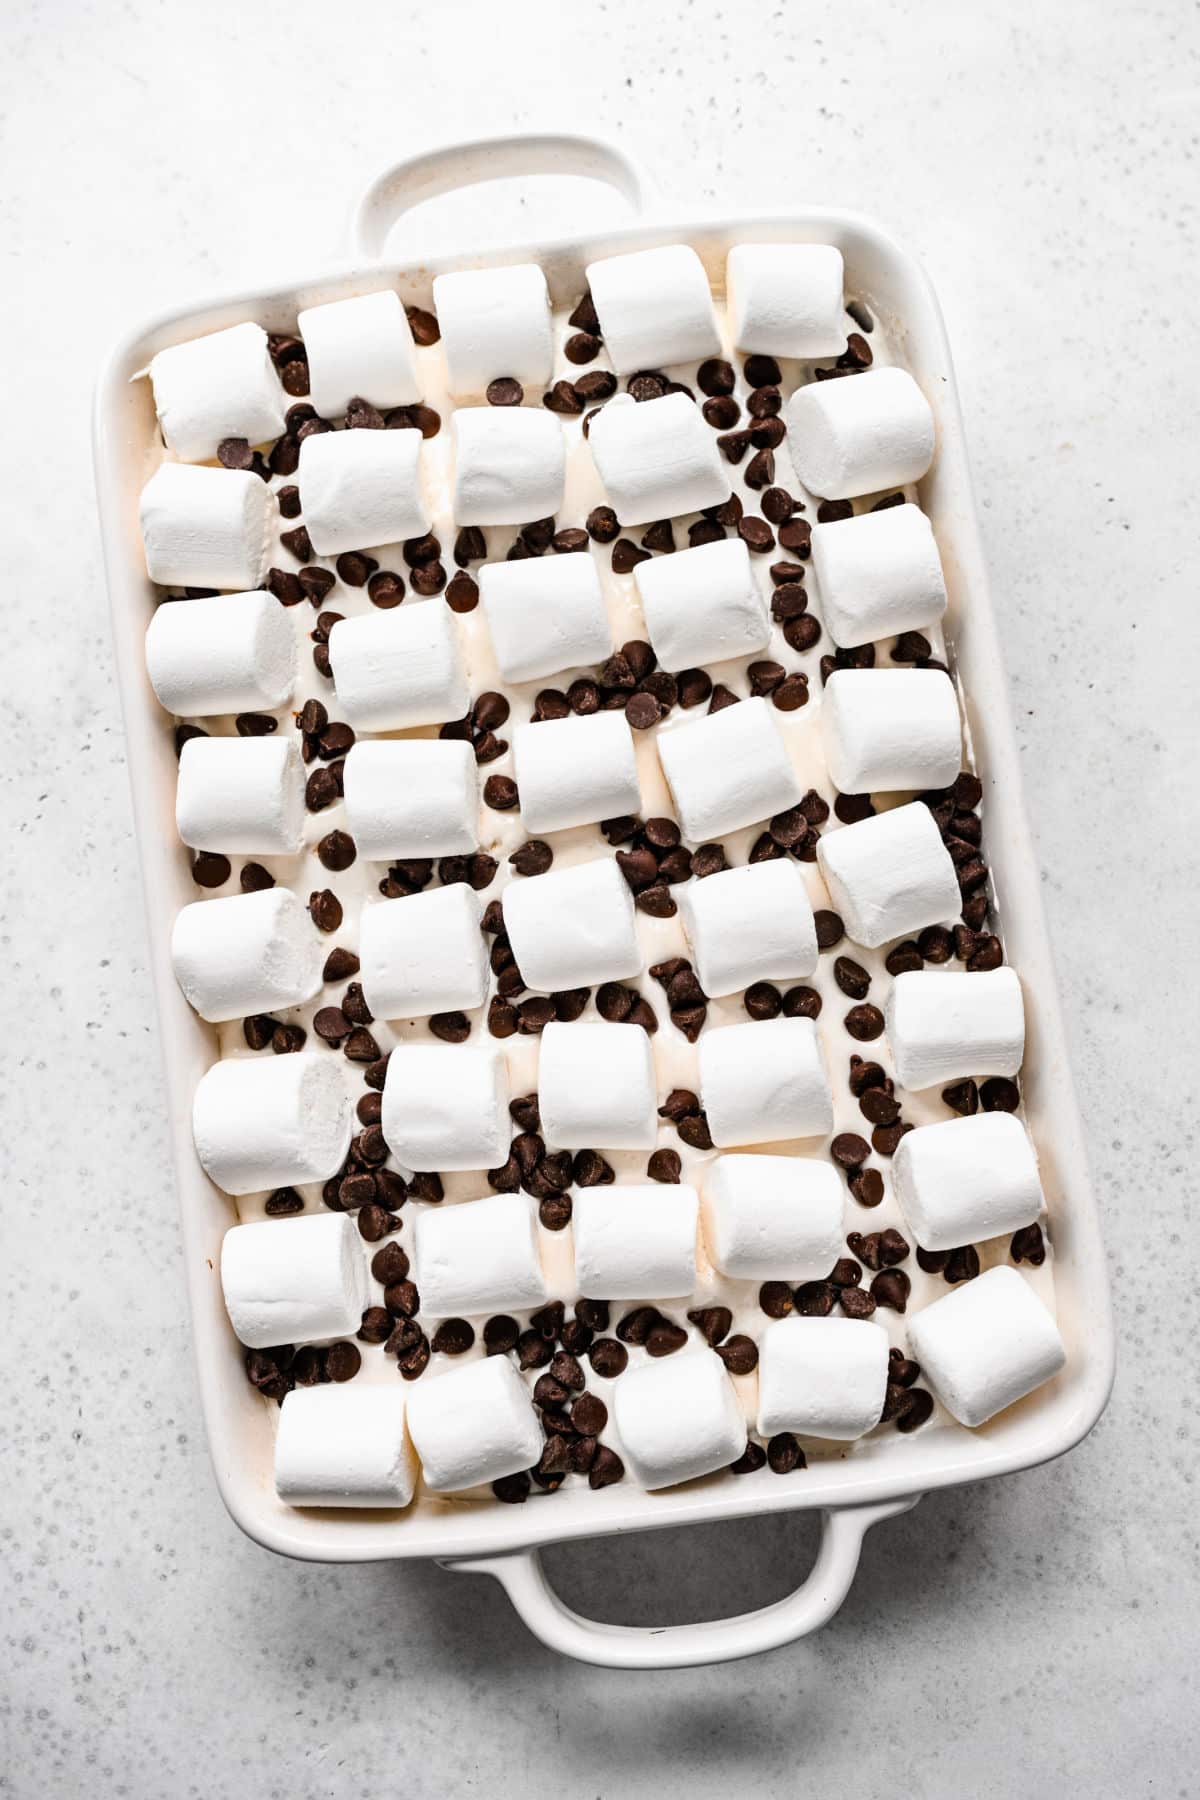 Chocolate chips sprinkled in between large marshmallows on a s'mores cake. 